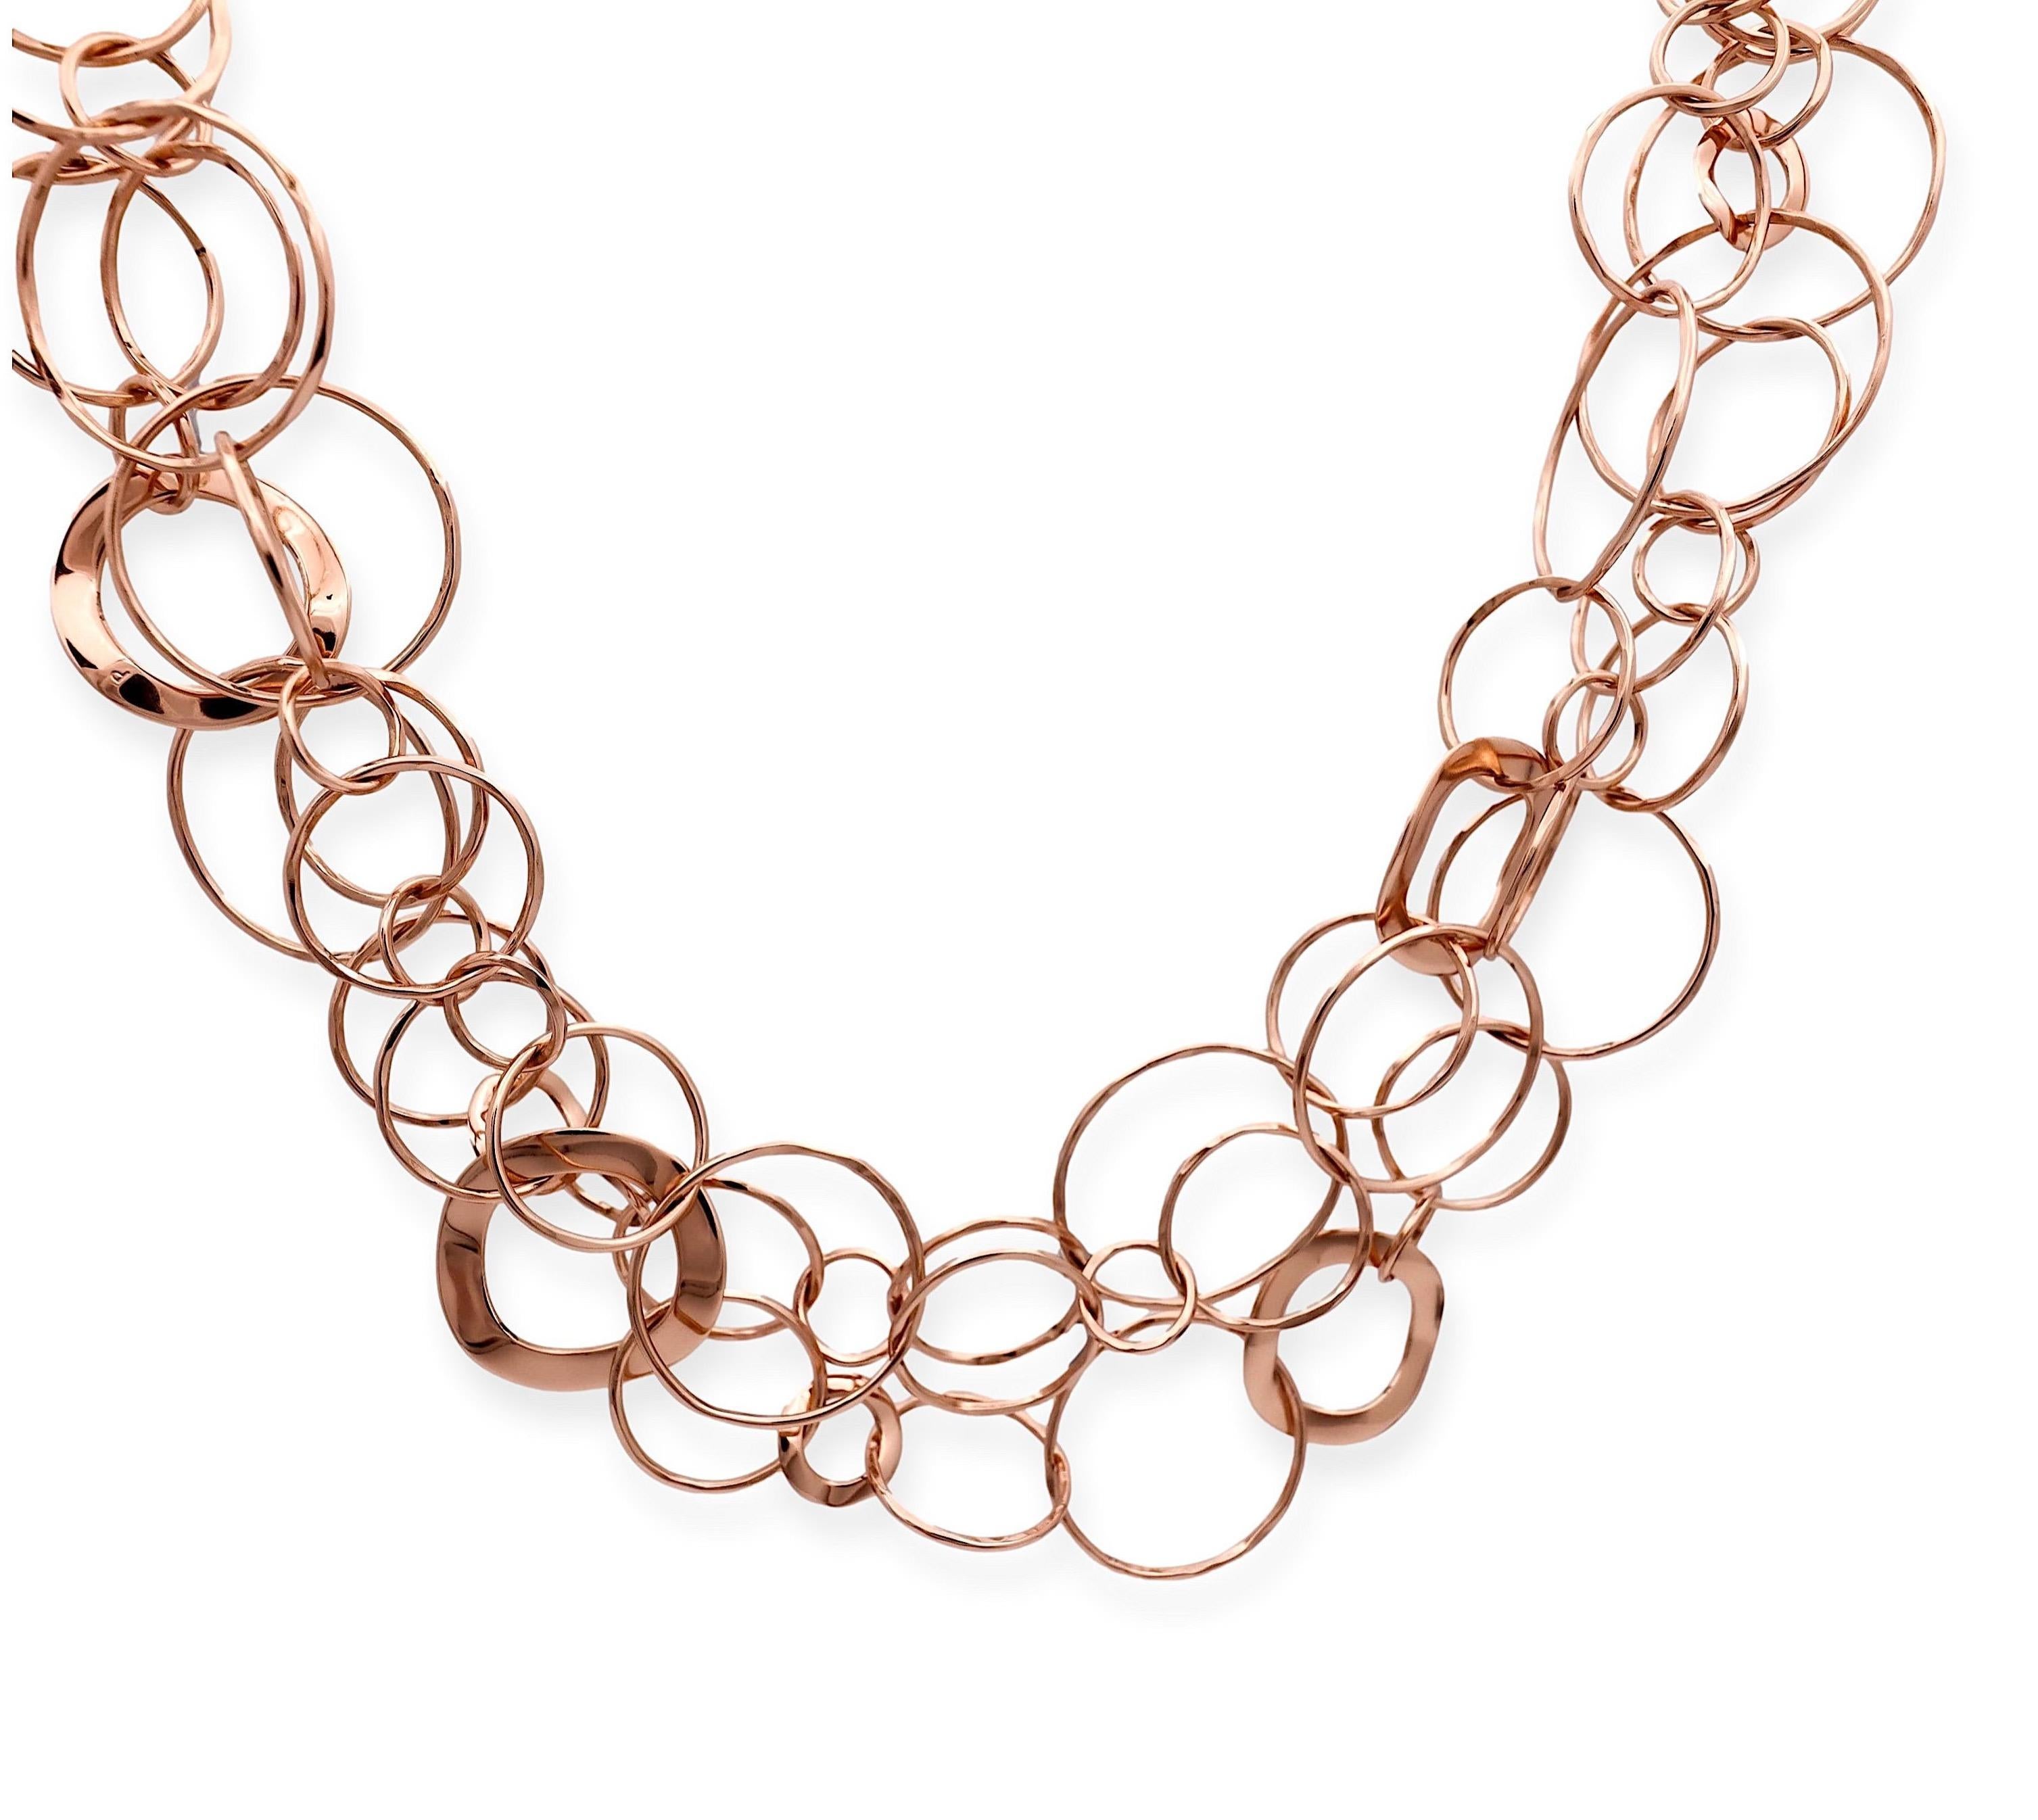 IPPOLITA's exquisite layered necklace in Rose gold vermeil and sterling silver intertwining hoops,  Effortlessly elegant with a secure lobster claw closure. Fully hallmarked with logo and metal content.

Necklace Specifications
Brand: